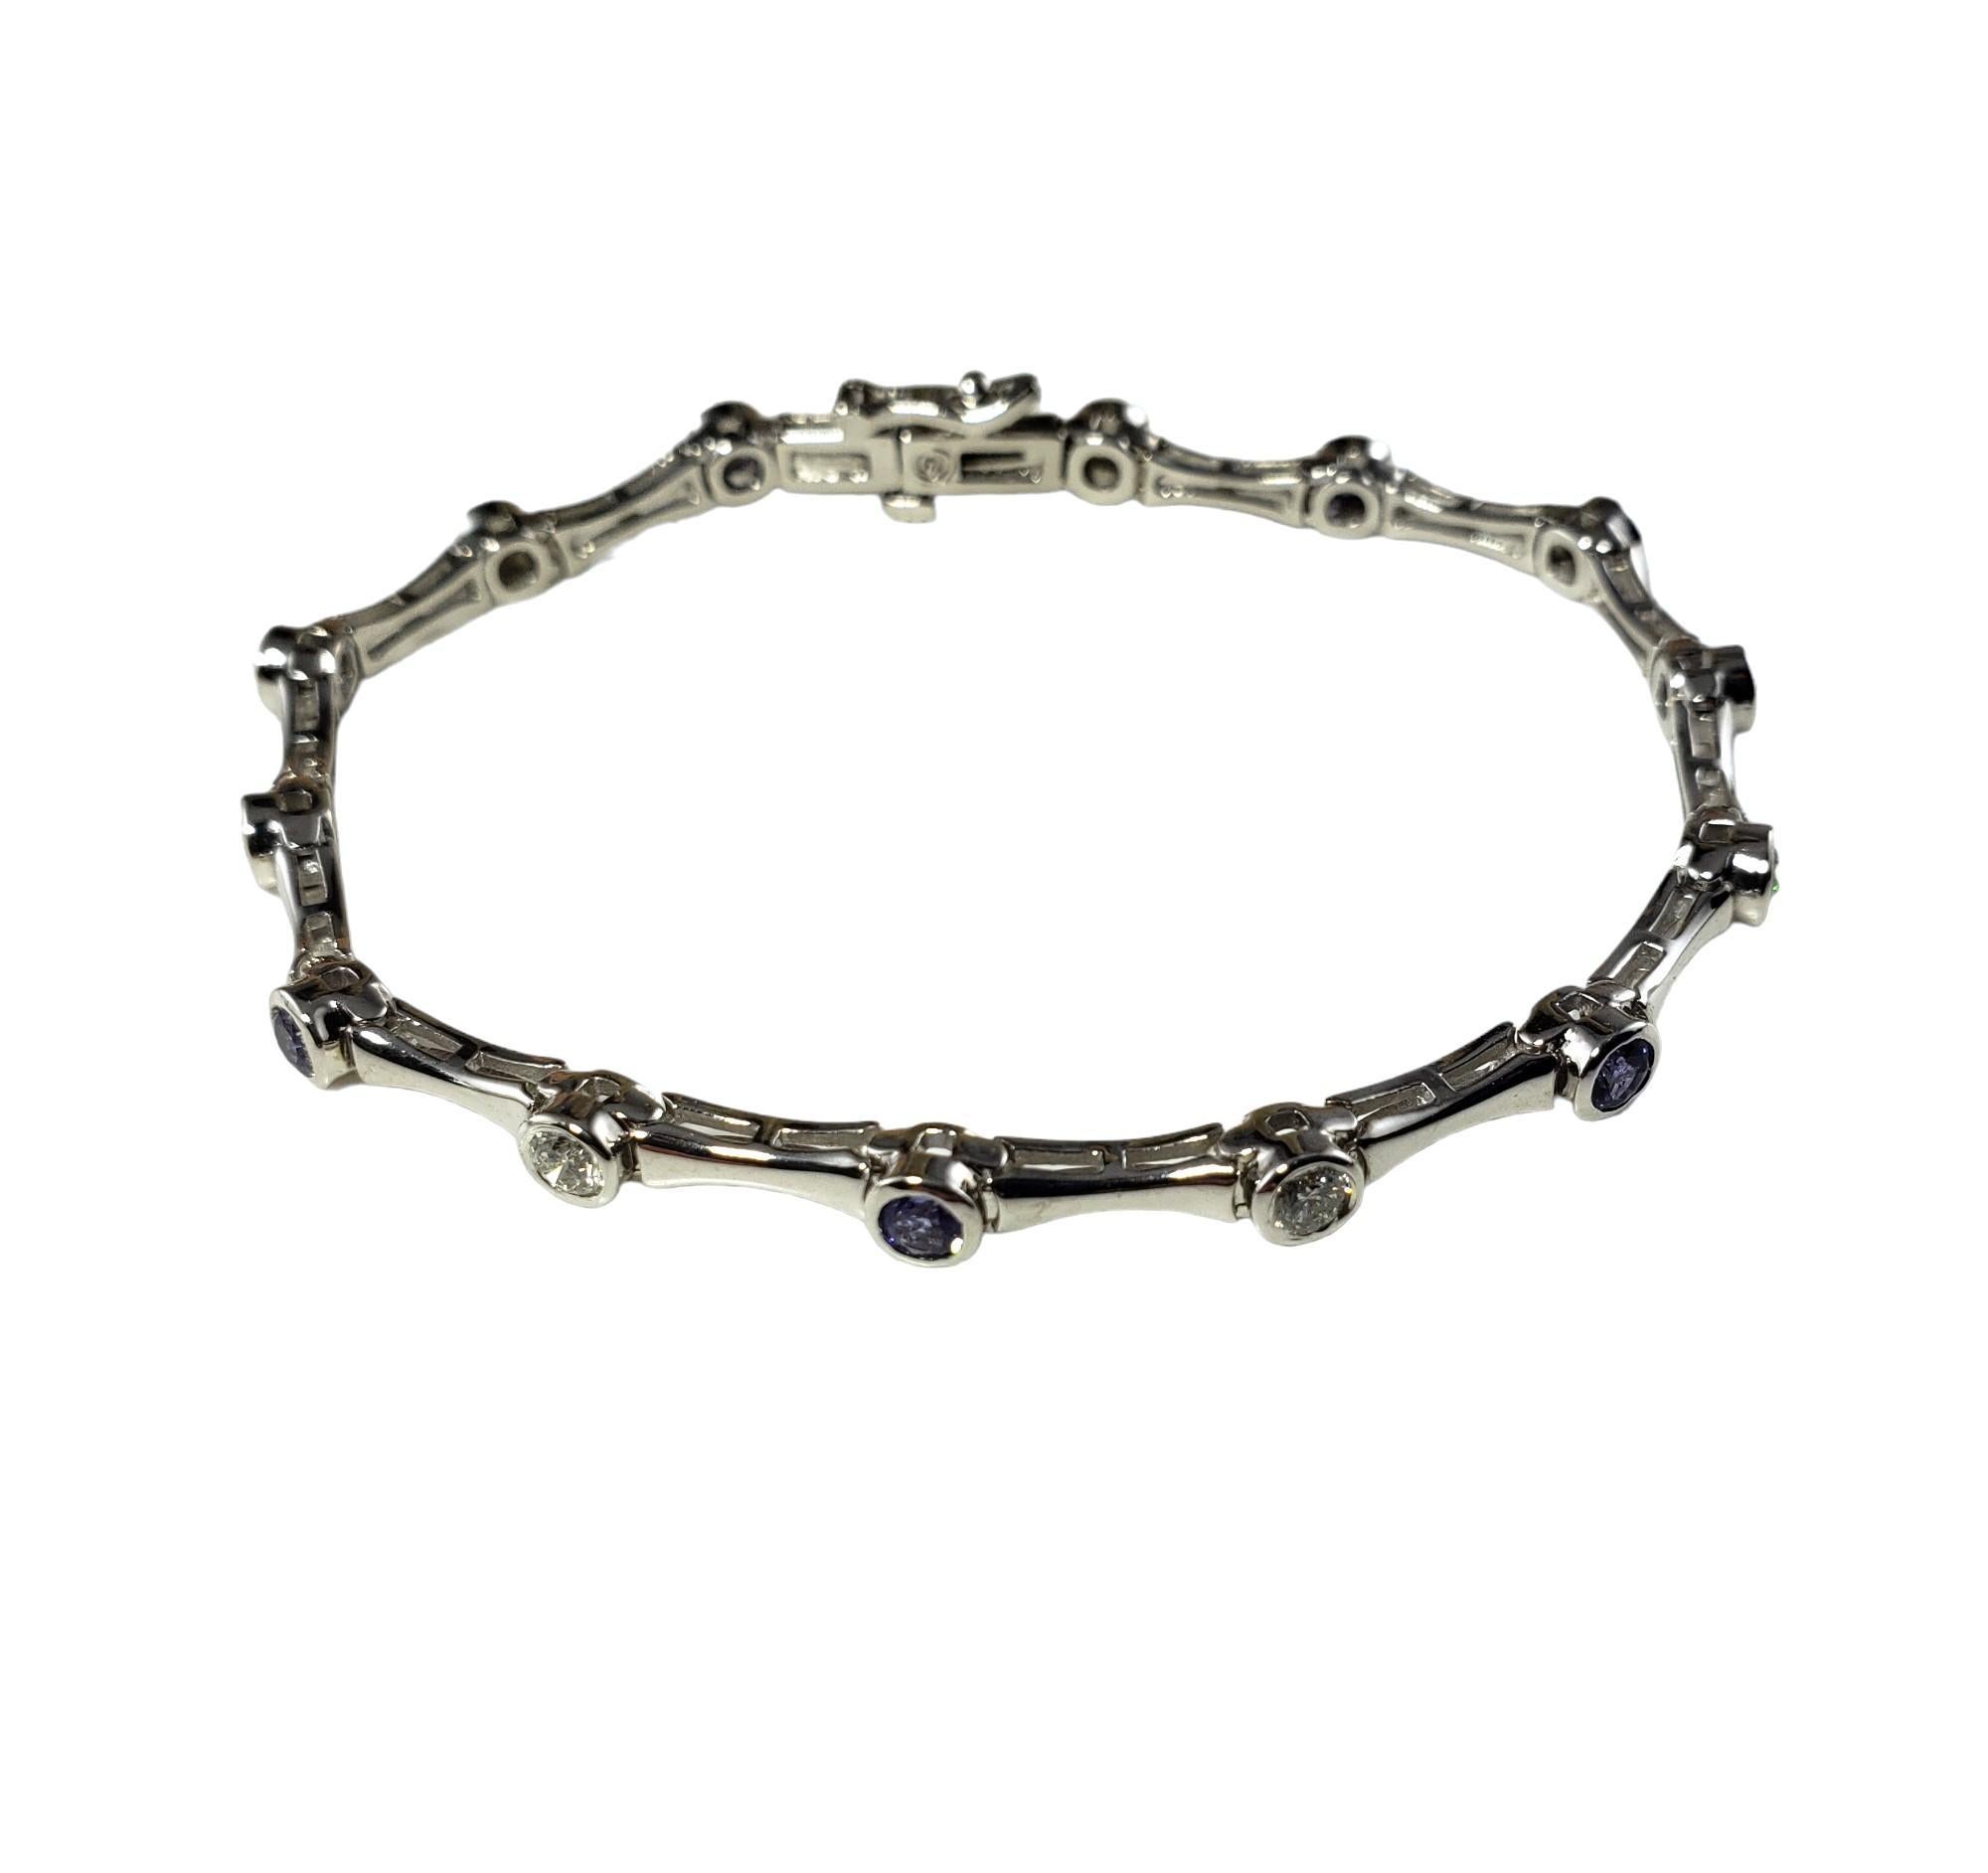 Vintage 14 Karat White Gold Diamond and Tanzanite Bracelet-

This lovely bracelet features seven round brilliant cut diamonds and seven round tanzanite stones set in classic 14K white gold.  Width:  4 mm.

Total tanzanite weight:  1.05 ct.

Total